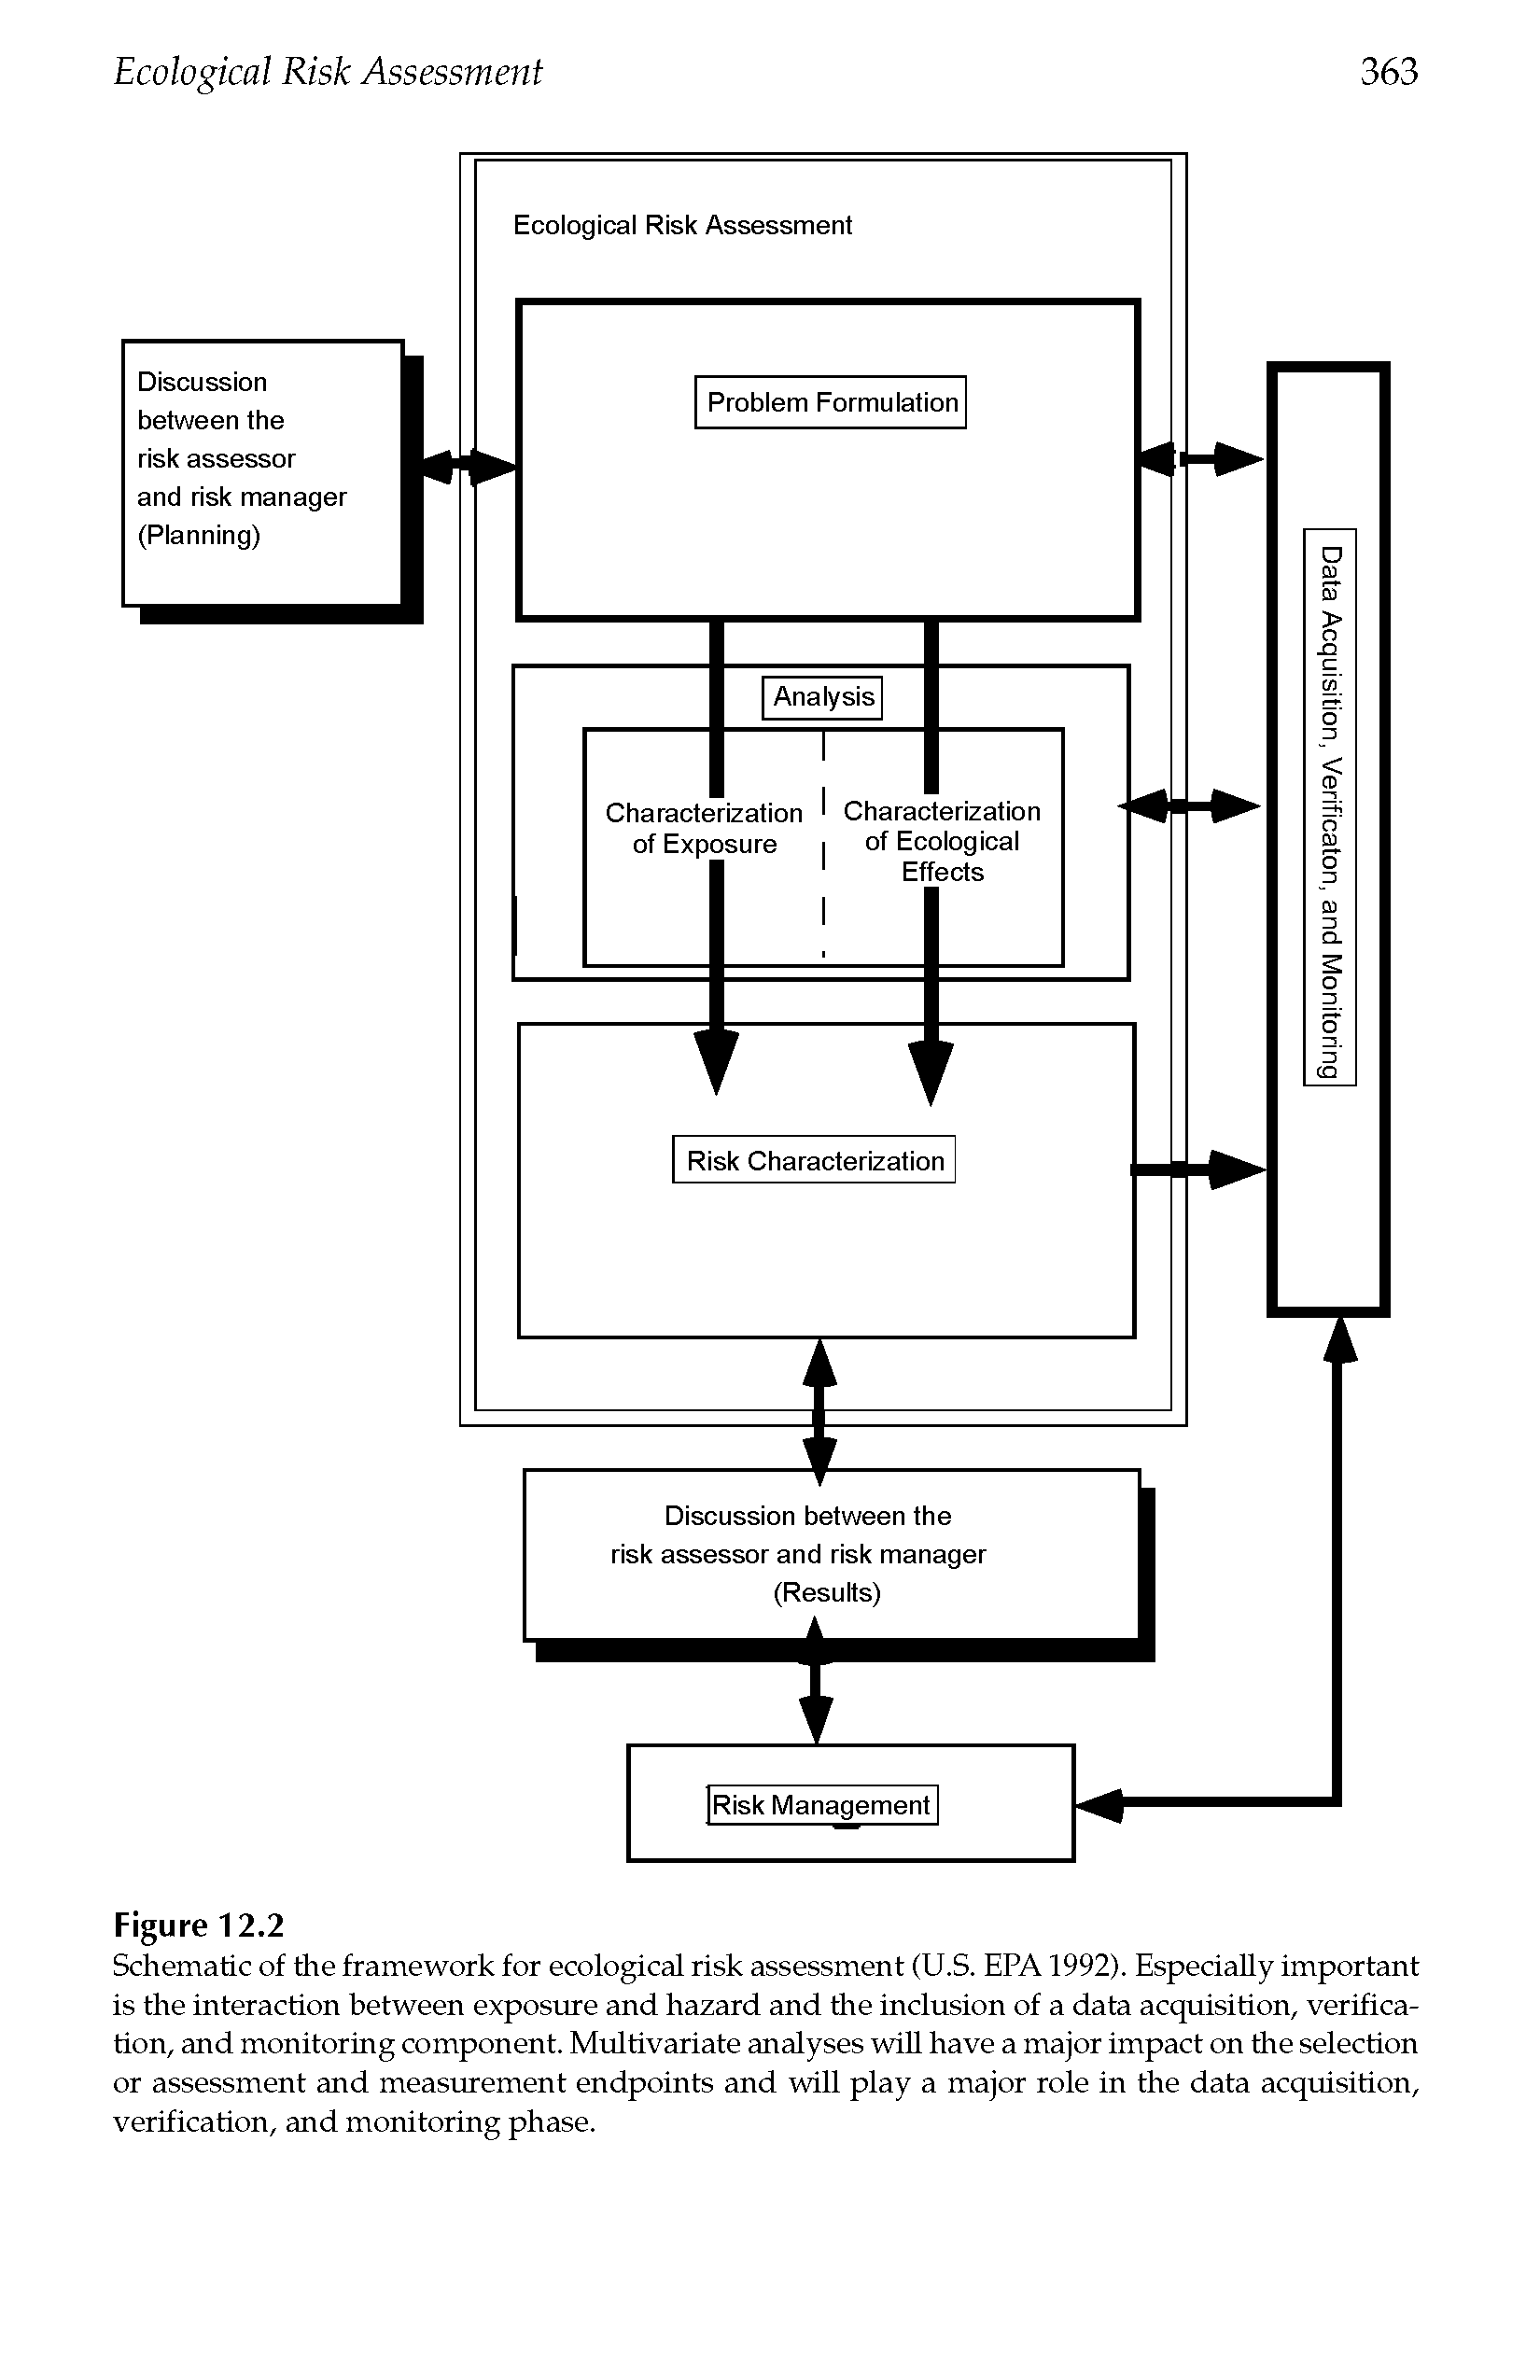 Schematic of the framework for ecological risk assessment (U.S. EPA1992). Especially important is the interaction between exposure and hazard and the inclusion of a data acquisition, verification, and monitoring component. Multivariate analyses will have a major impact on the selection or assessment and measurement endpoints and will play a major role in the data acquisition, verification, and monitoring phase.